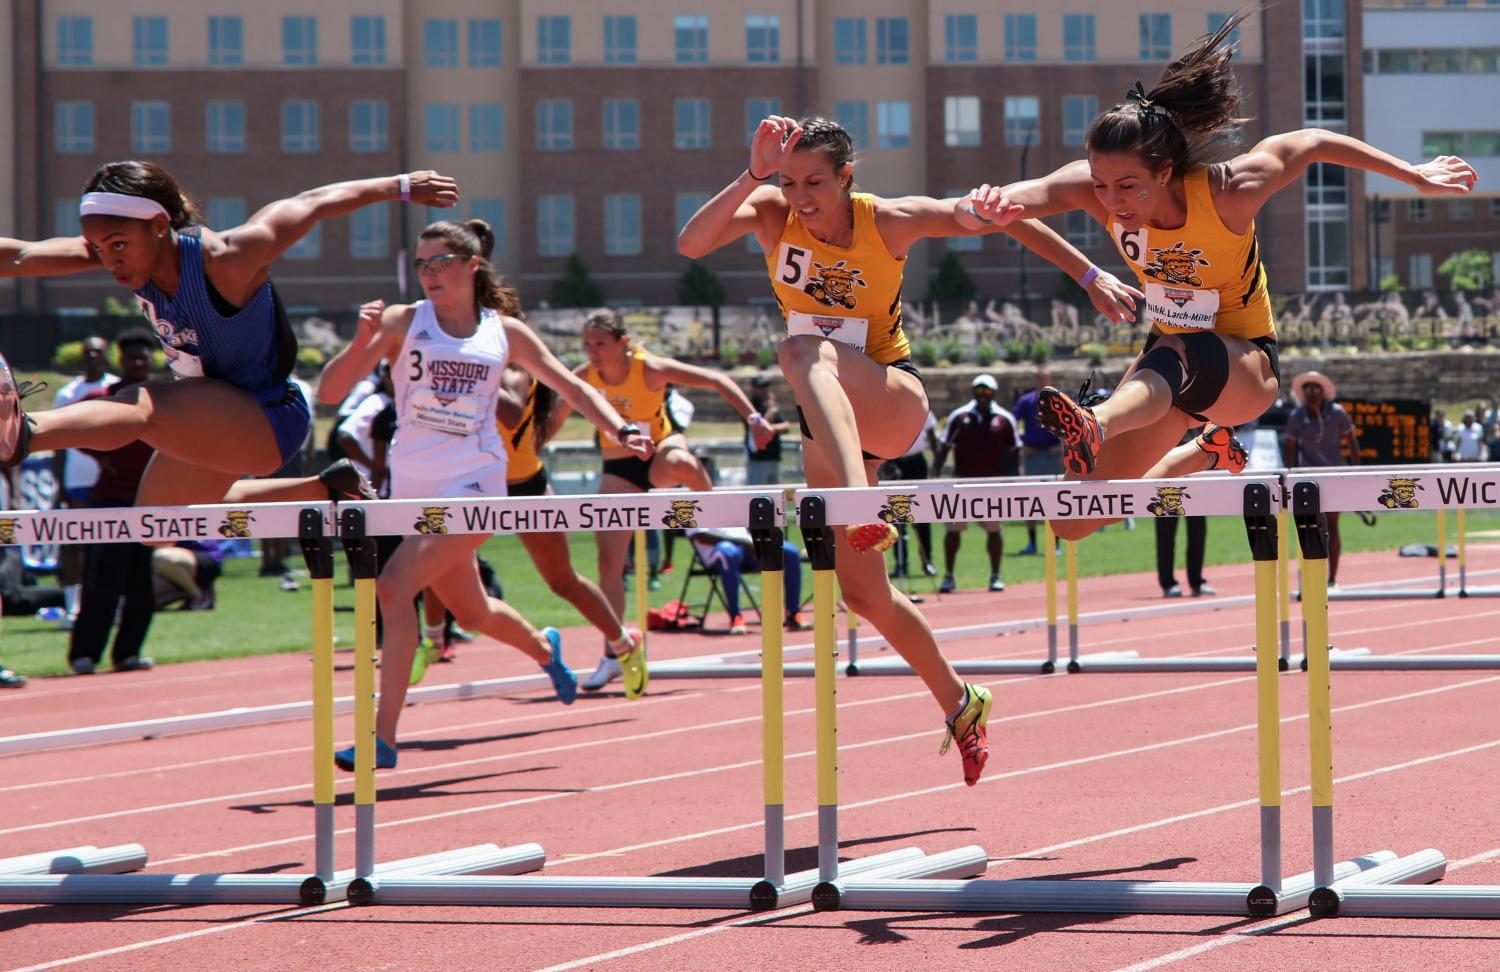 Nikki (6) and Taylor (5) Larch-Miller try to catch Mary Young in the 100 meter hurdles Sunday at the Missouri Valley Conference Outdoor Track and Field Championship. Young placed first followed by Nikki then Taylor. (May 14, 2017)